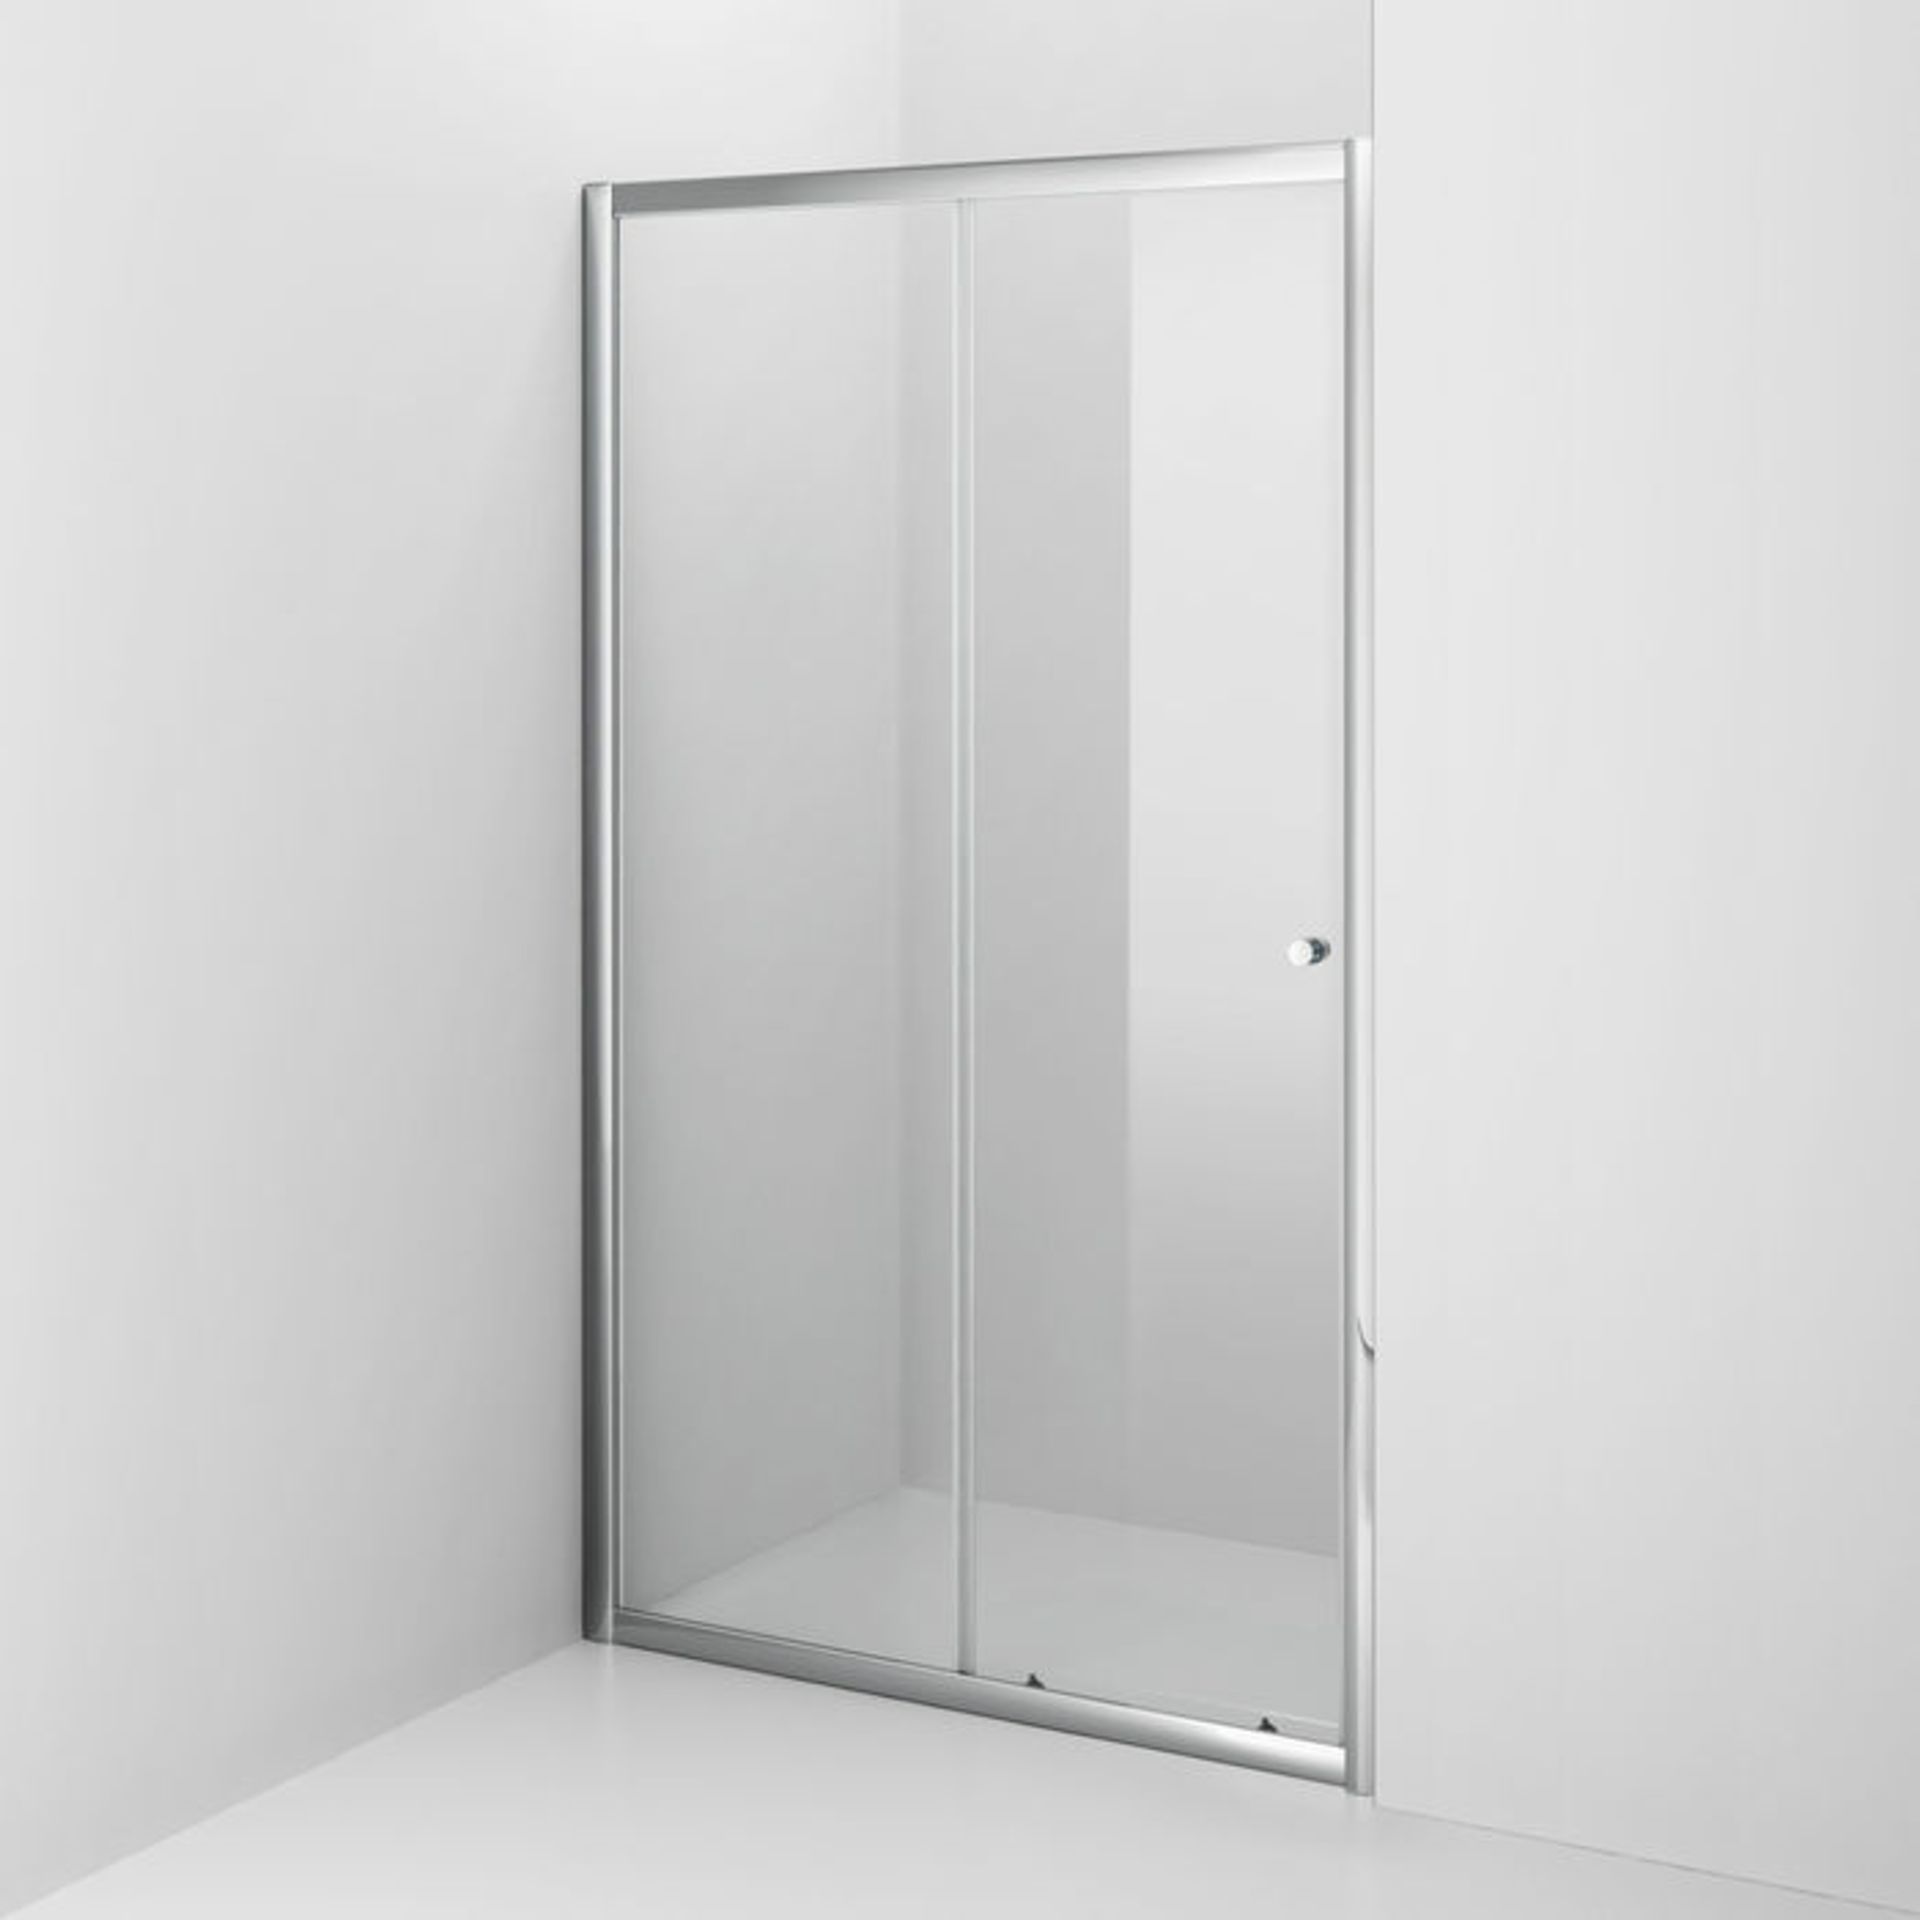 NEW Twyfords 1200mm - Elements Sliding Shower Door. RRP £299.99. 4mm Safety Glass Fully waterp... - Image 3 of 3